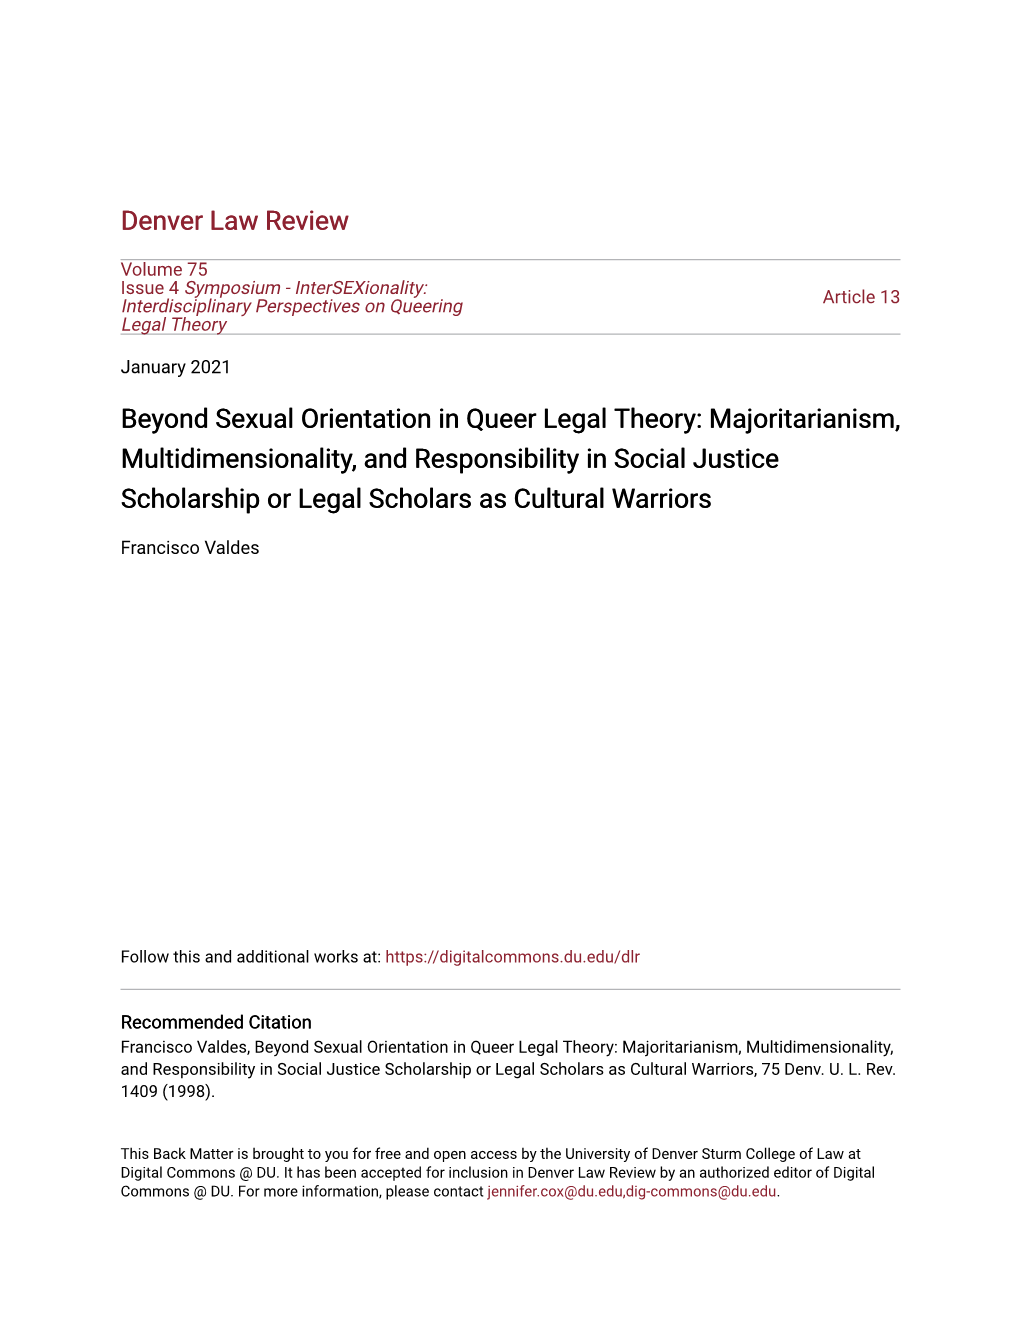 Beyond Sexual Orientation in Queer Legal Theory